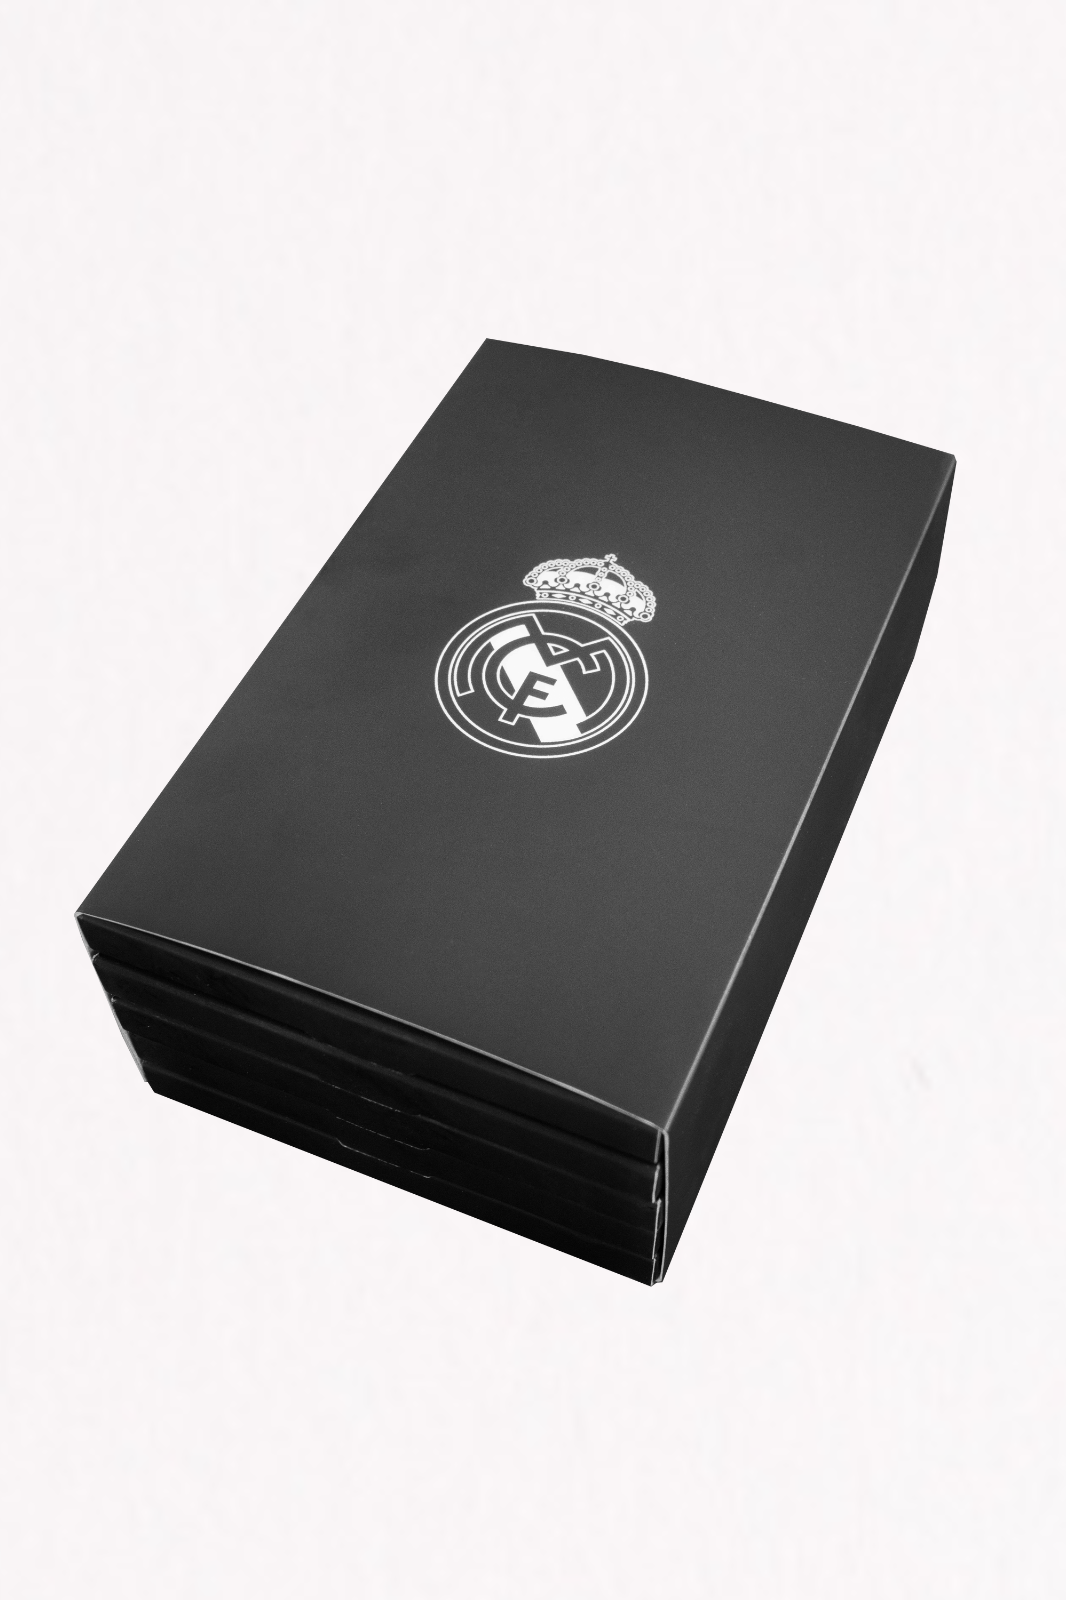 Real Madrid - Mystery Pack of 8 Icons limited to 100